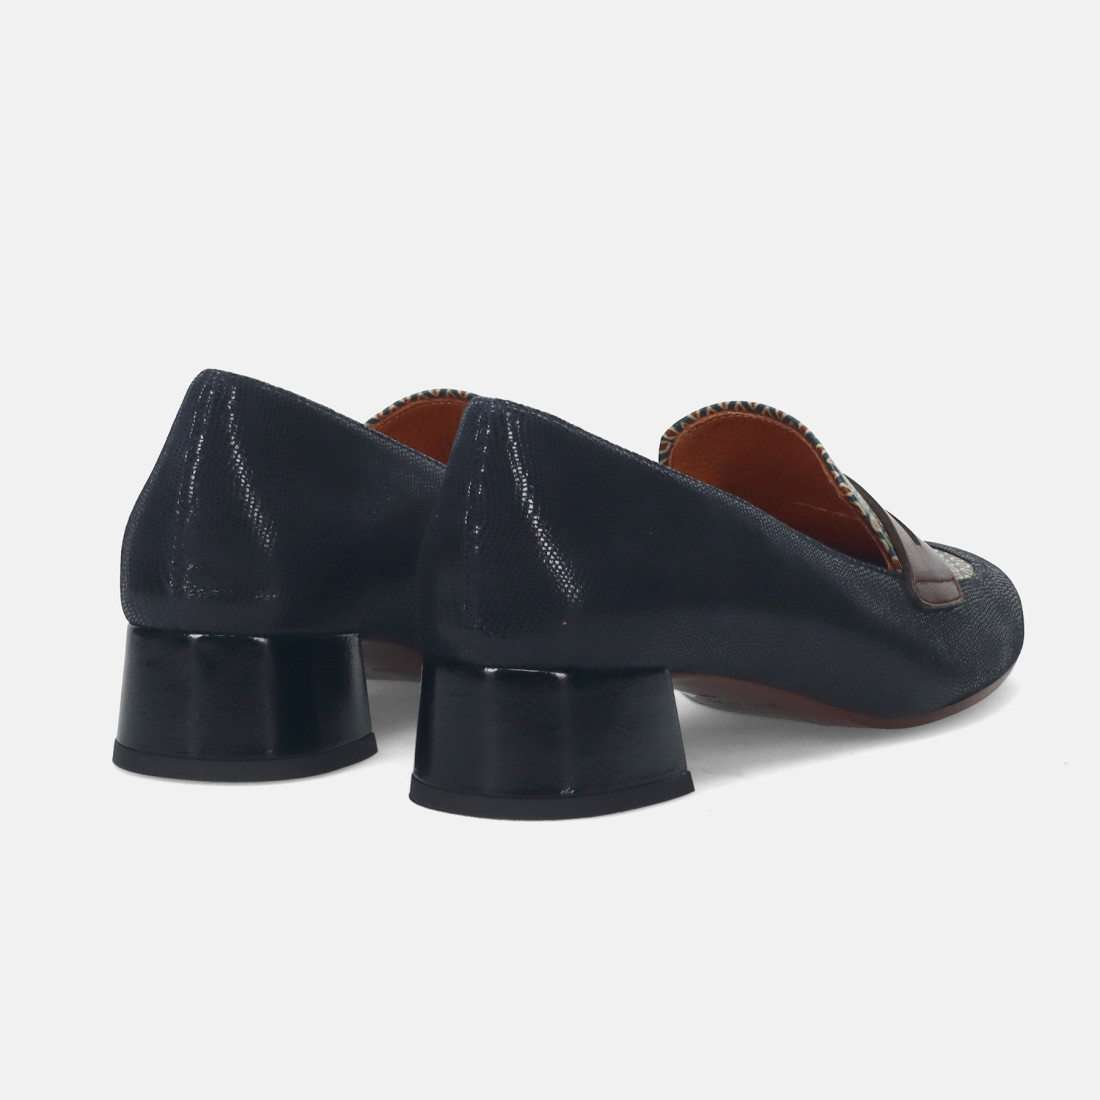 Chie Mihara Raye navy blue loafer with geometric prints